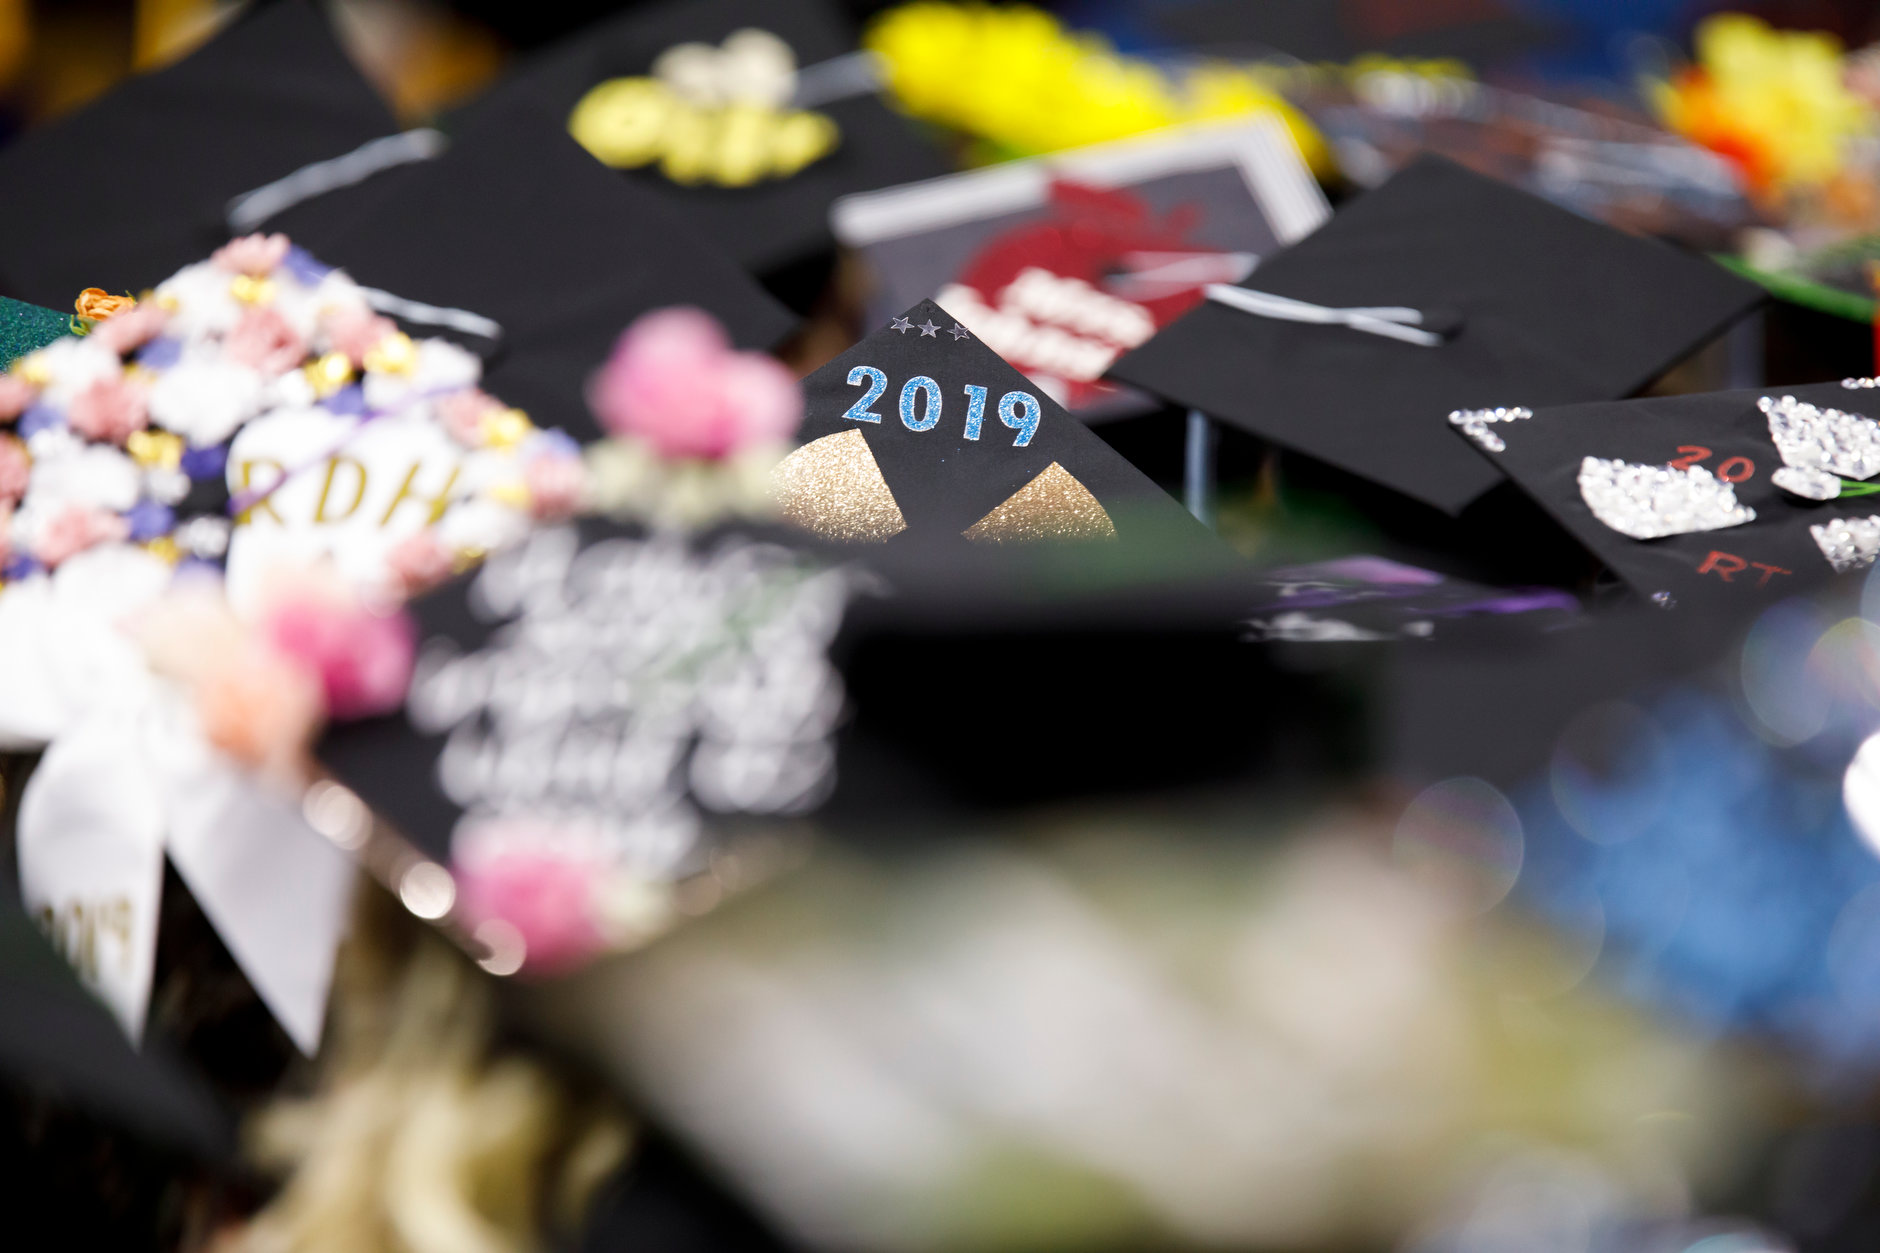 A variety of decorated mortarboards are pictured during the Indiana University South Bend Commencement at the University of Notre Dame on Tuesday, May 7, 2019. (James Brosher/Indiana University)